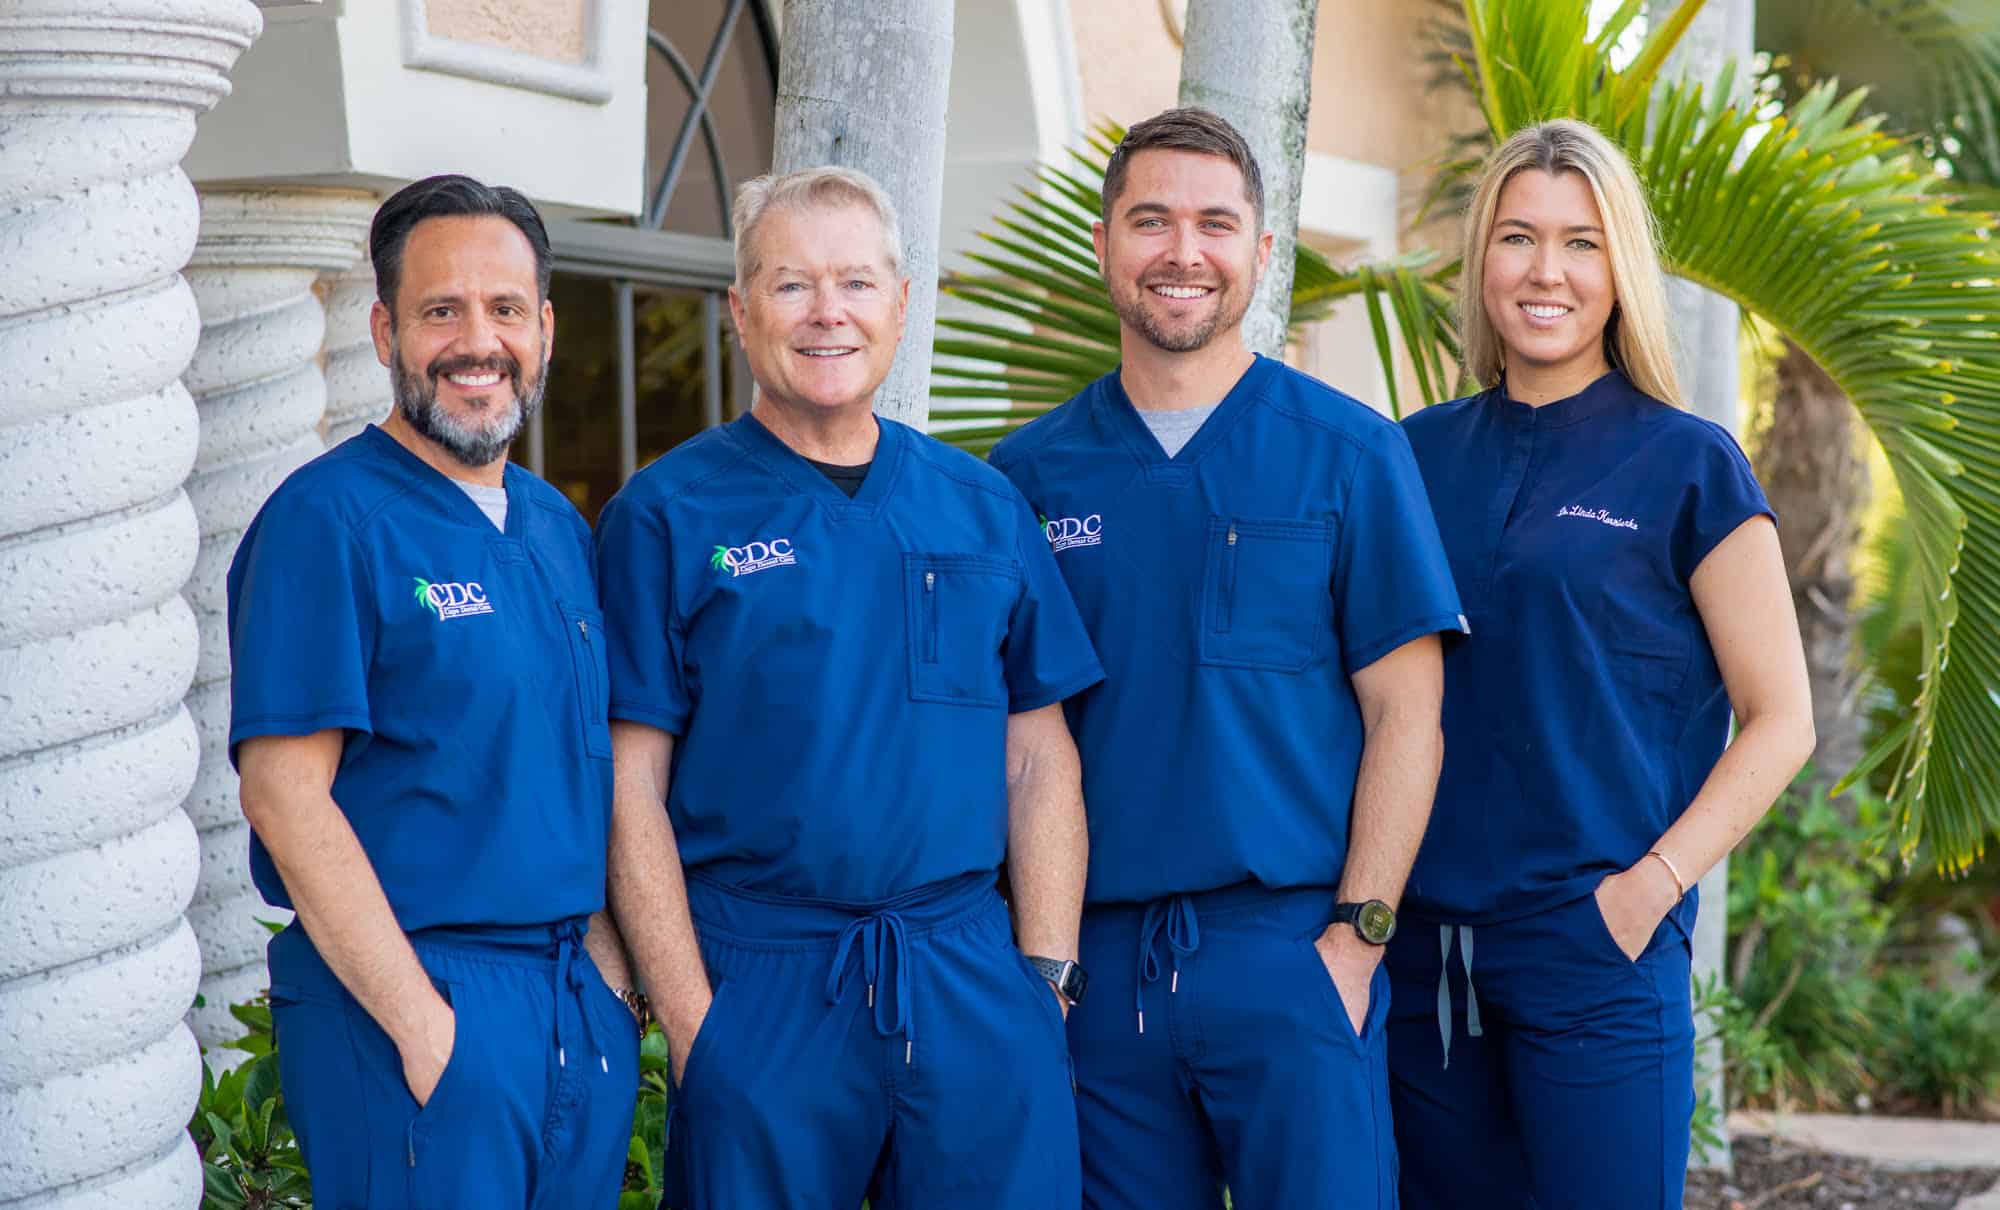 Cape Dental Care's four doctors from left to right Dr. Mario Romero (left), Dr. Mark Kraver (left middle), Dr. Phillip Kraver (right middle), and Dr. Linda Kornienko (right) smiling as they pose together in front of their office